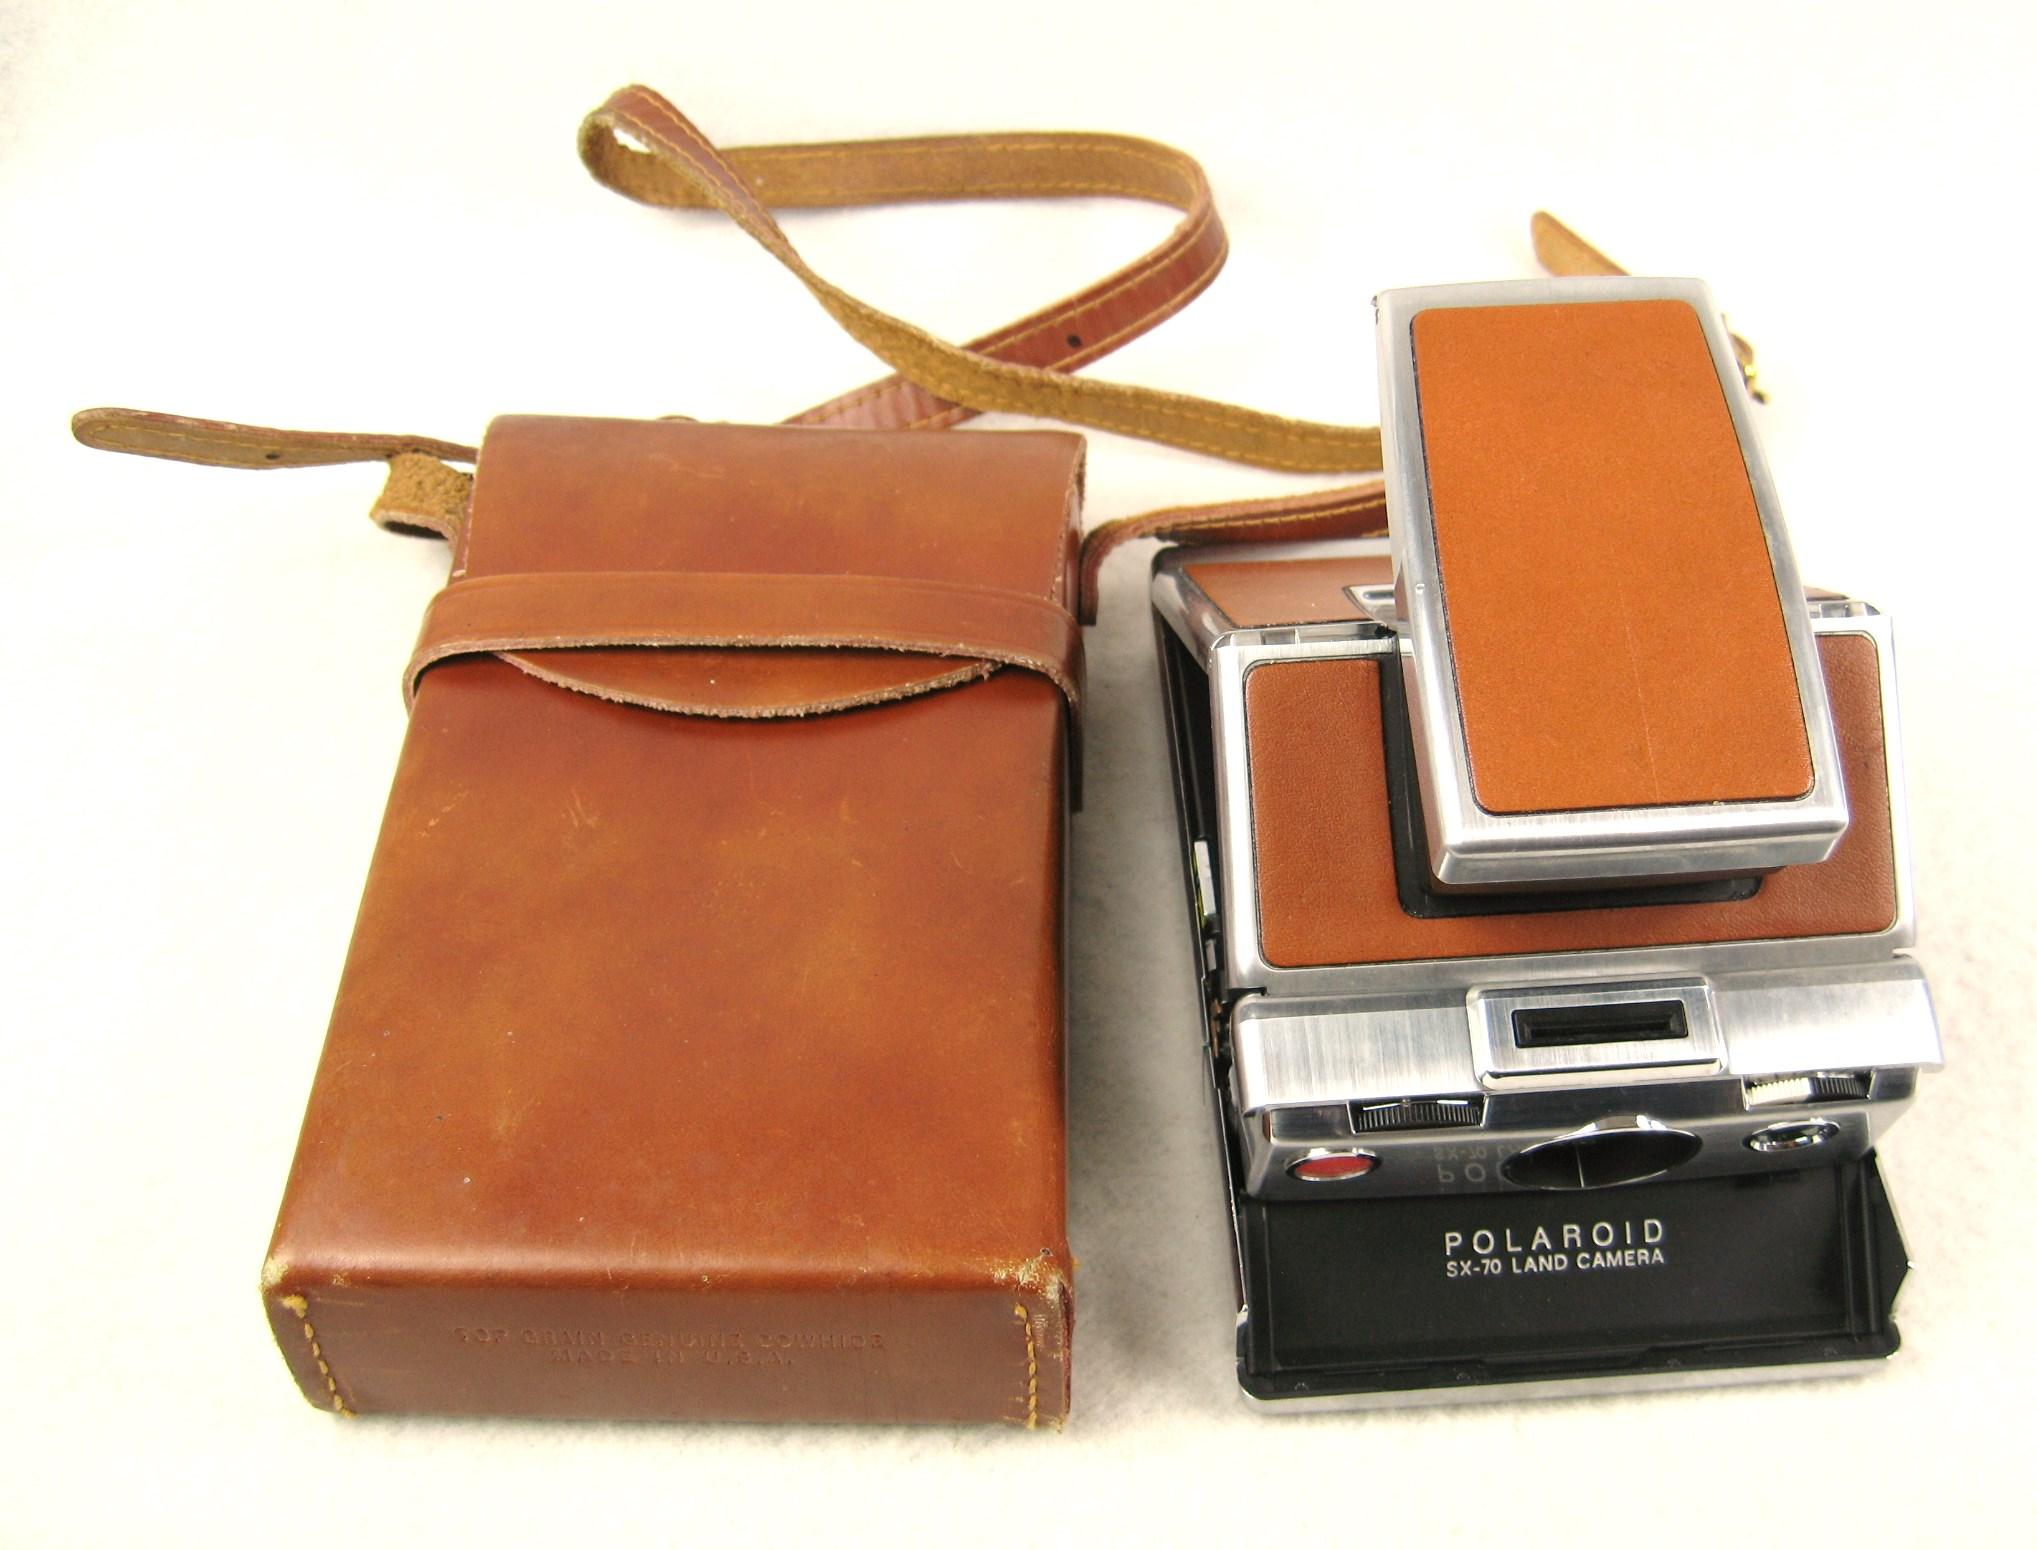 Vintage Polaroid SX-70 Tan Land Camera by Henry Dreyfuss For Sale 6